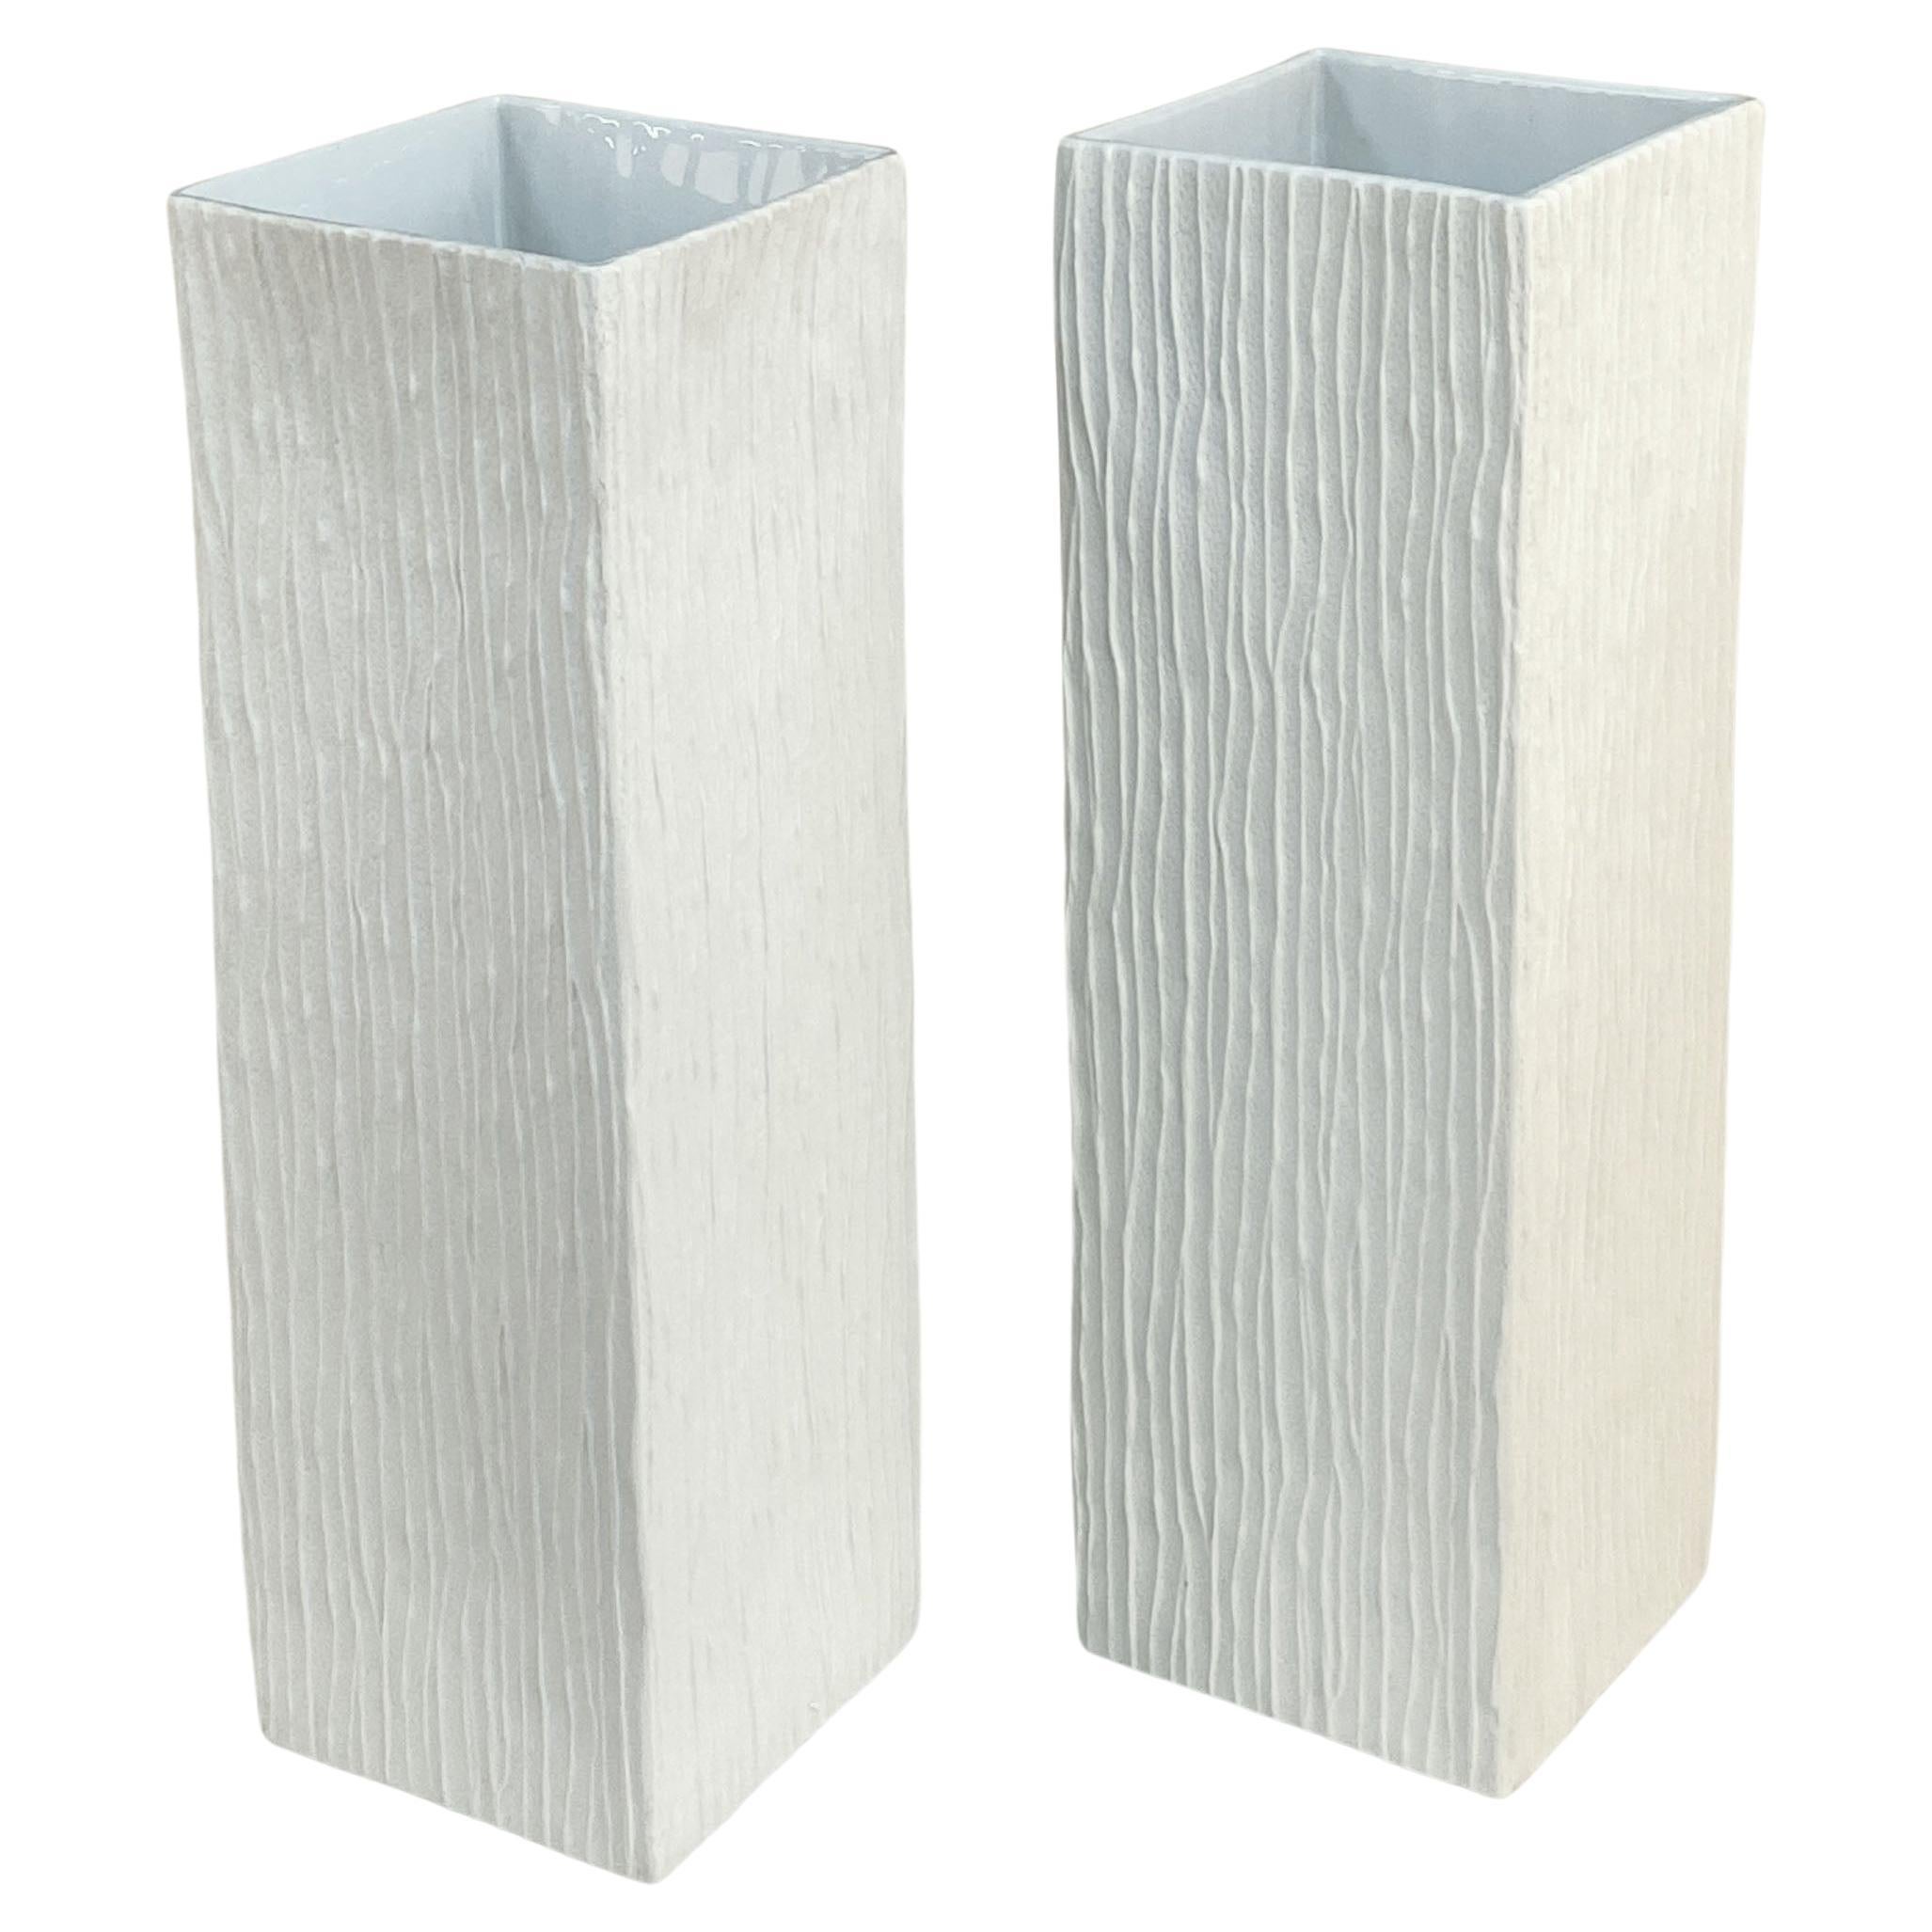 Pair of Large White Square Relief Vases by Hutschenreuther For Sale